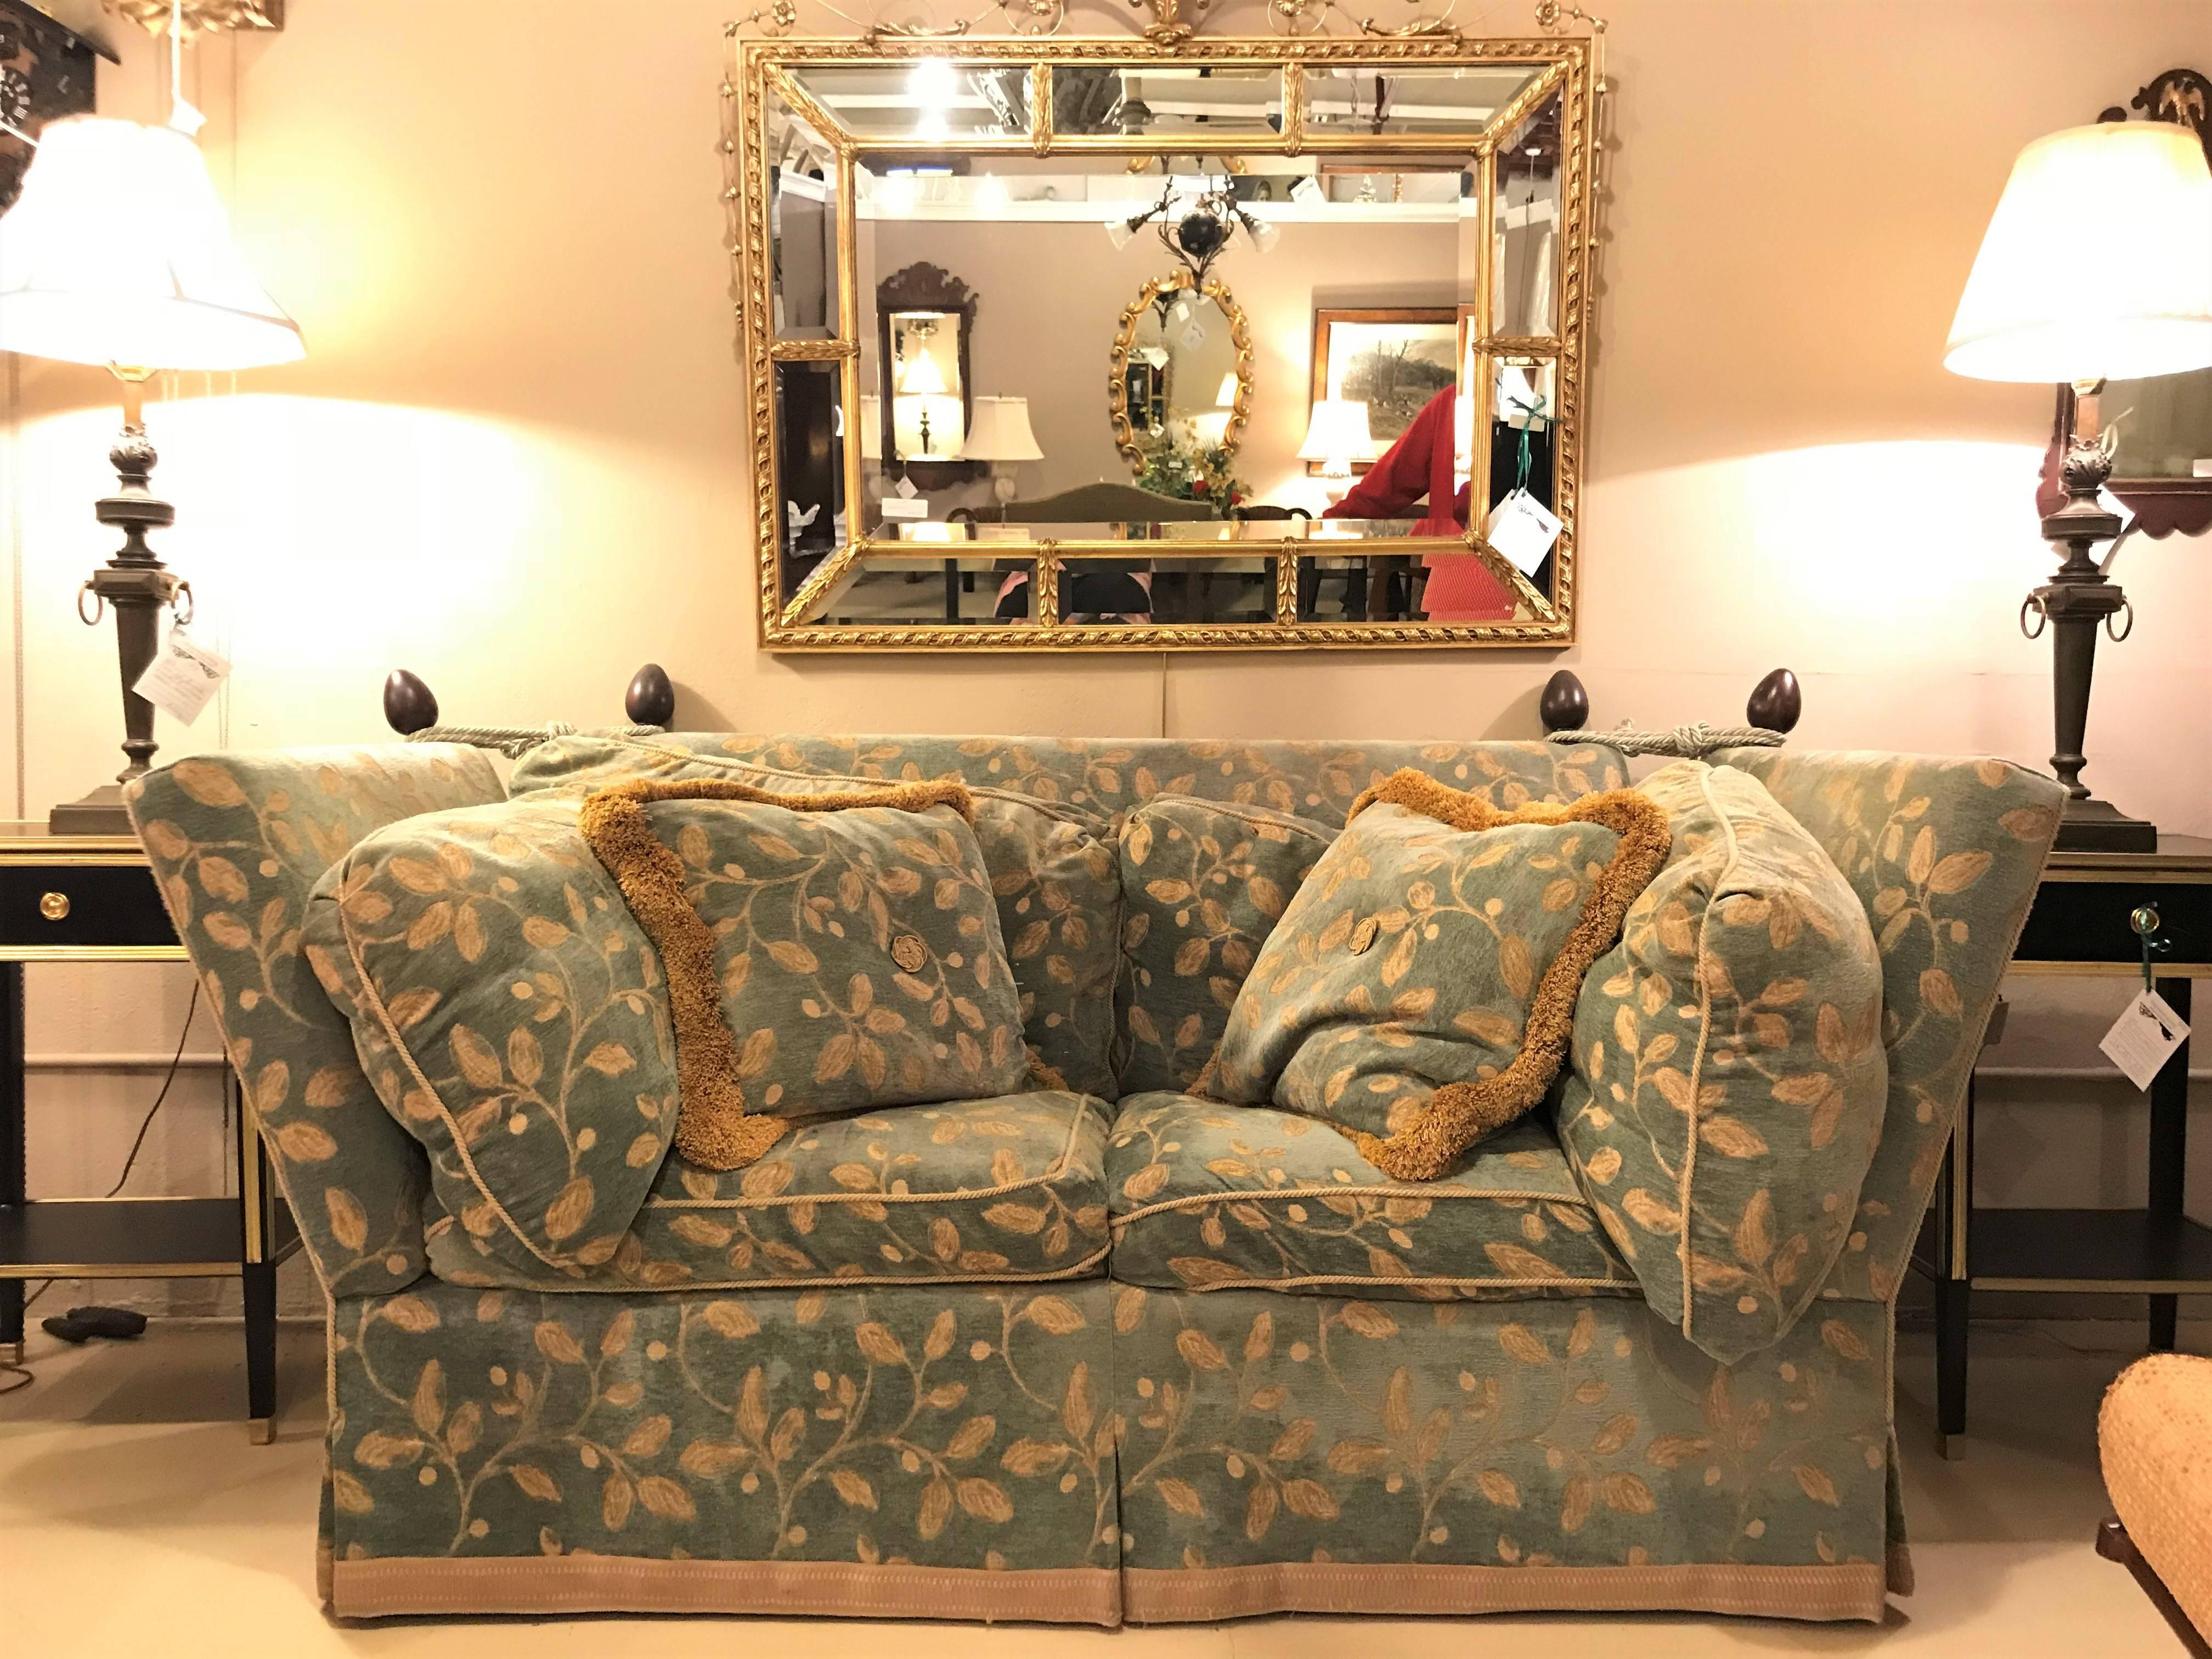 A Knole sofa daybed. This sofa is in good condition and comes with a large variety of custom pillows and throws.